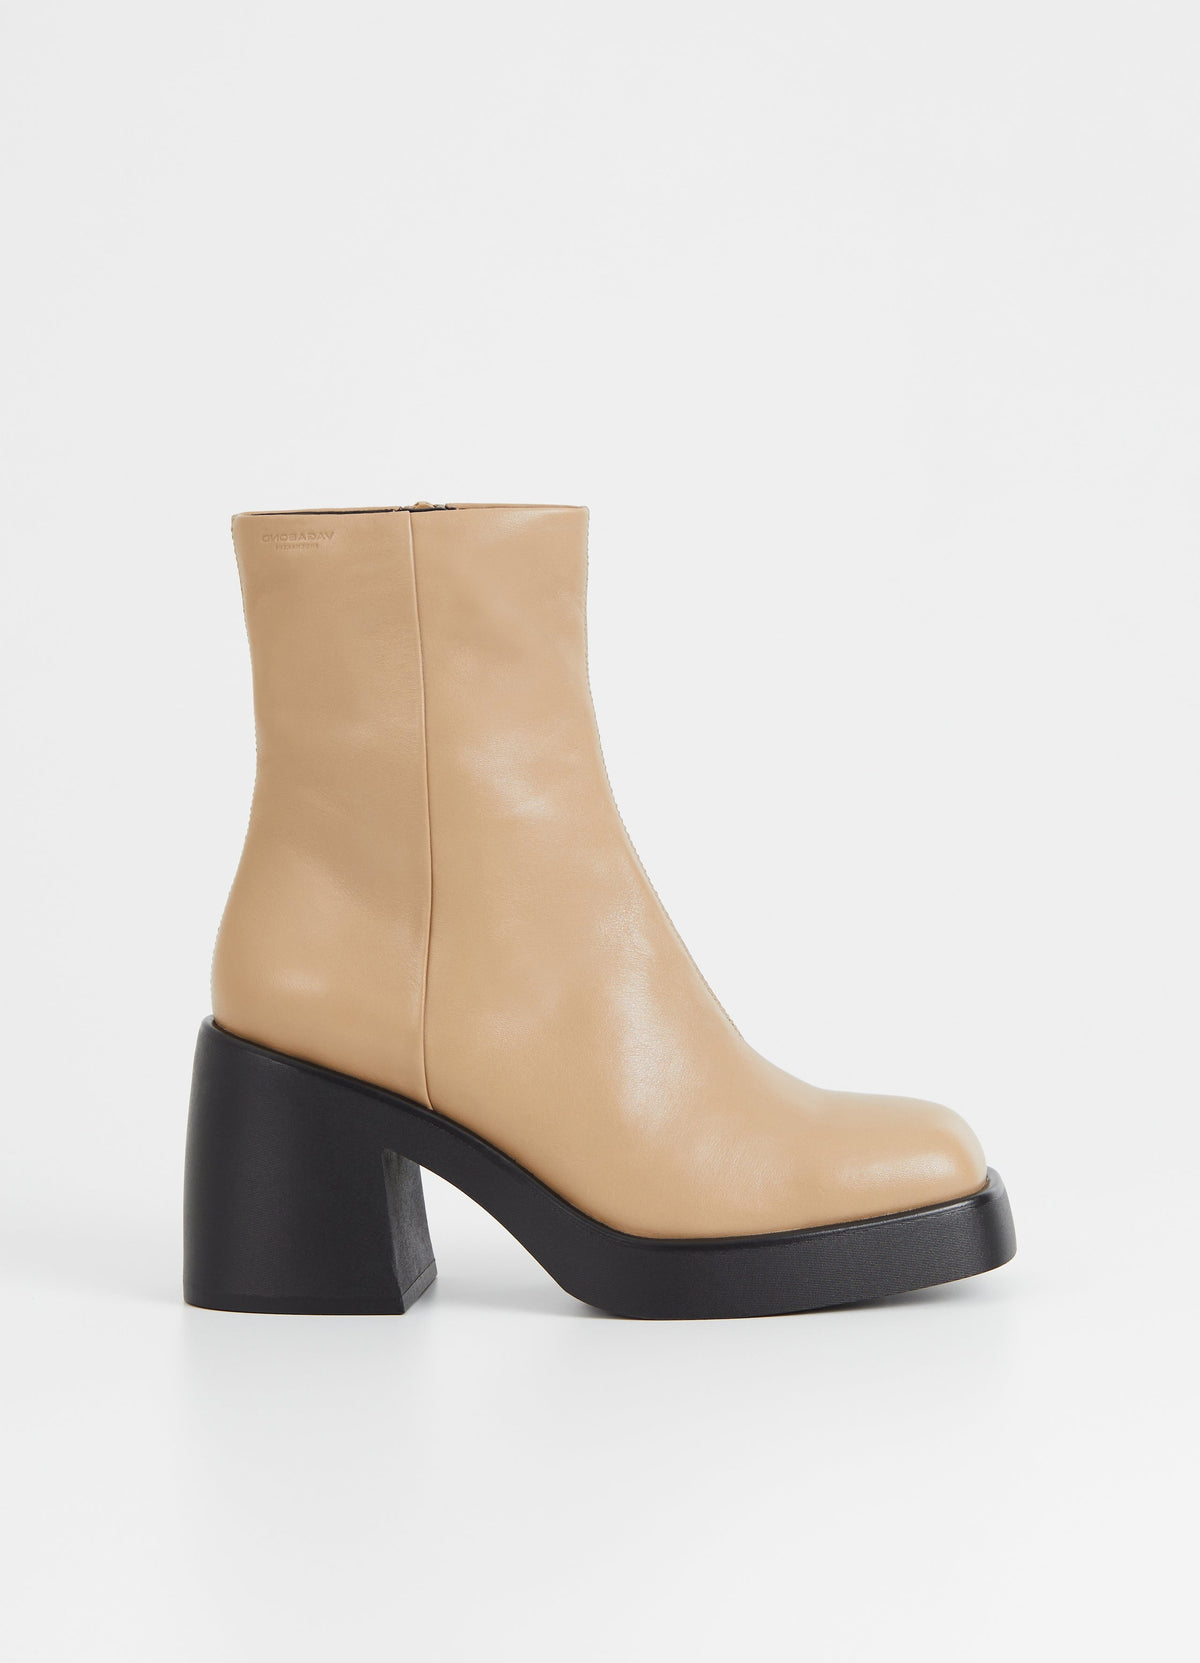 Beige leather boots on a chunky sole with side zip